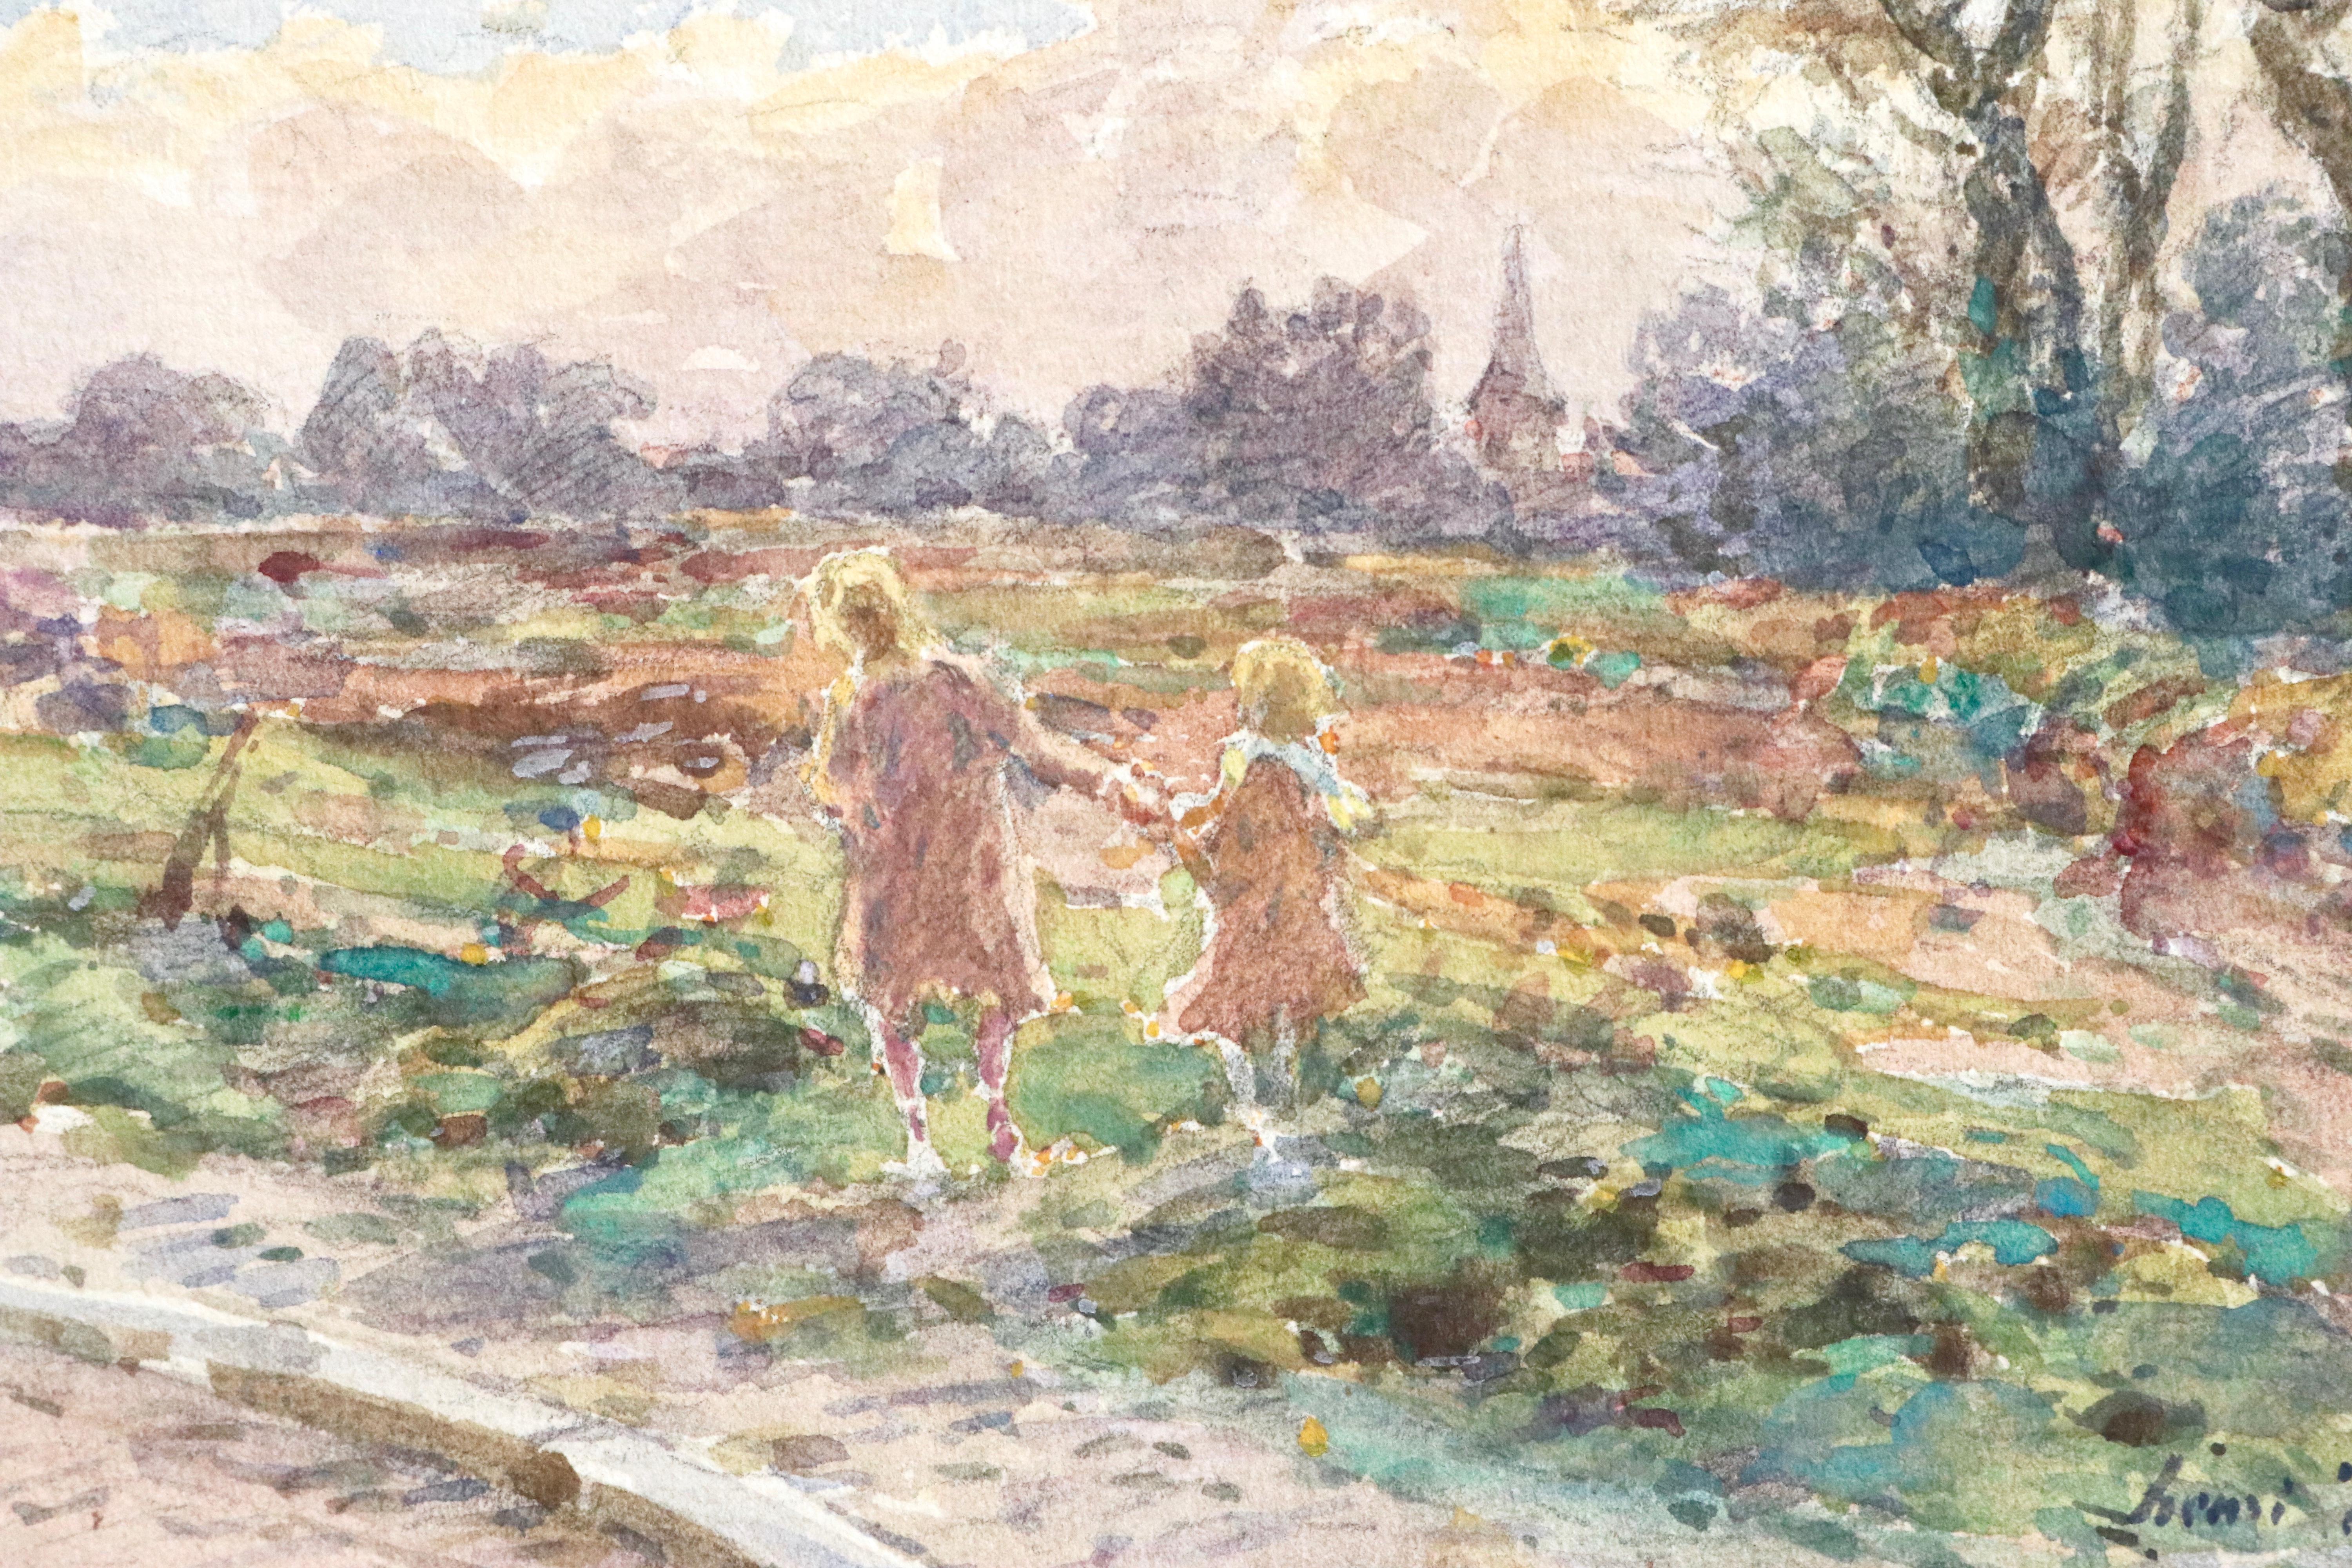 Hand in Hand - 19th Century Watercolor, Young Girls in Landscape by Henri Duhem 2